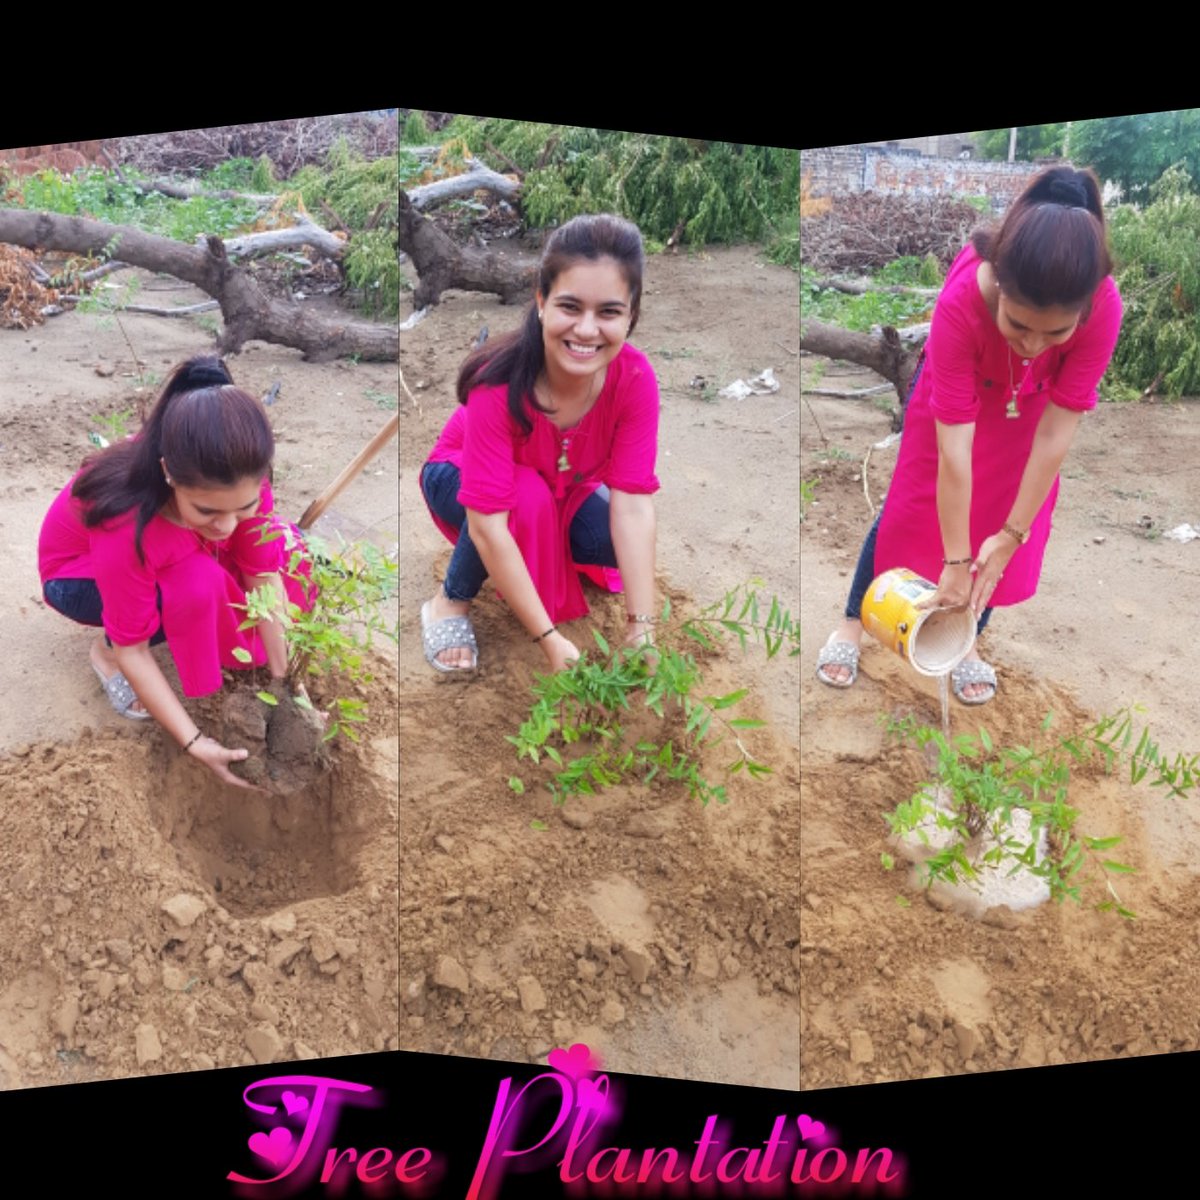 By following pious teachings of My Guru ji I have celebrated this pious occasion of his birthday by planting a sapling🌳
Here is my #SelfieWithTree 🌳 To Wish my Godfather @Gurmeetramrahim ji A Very Happy B'day🎂
Please accept my gift🙏
#MegaTreePlantationDrive 14 August 😊